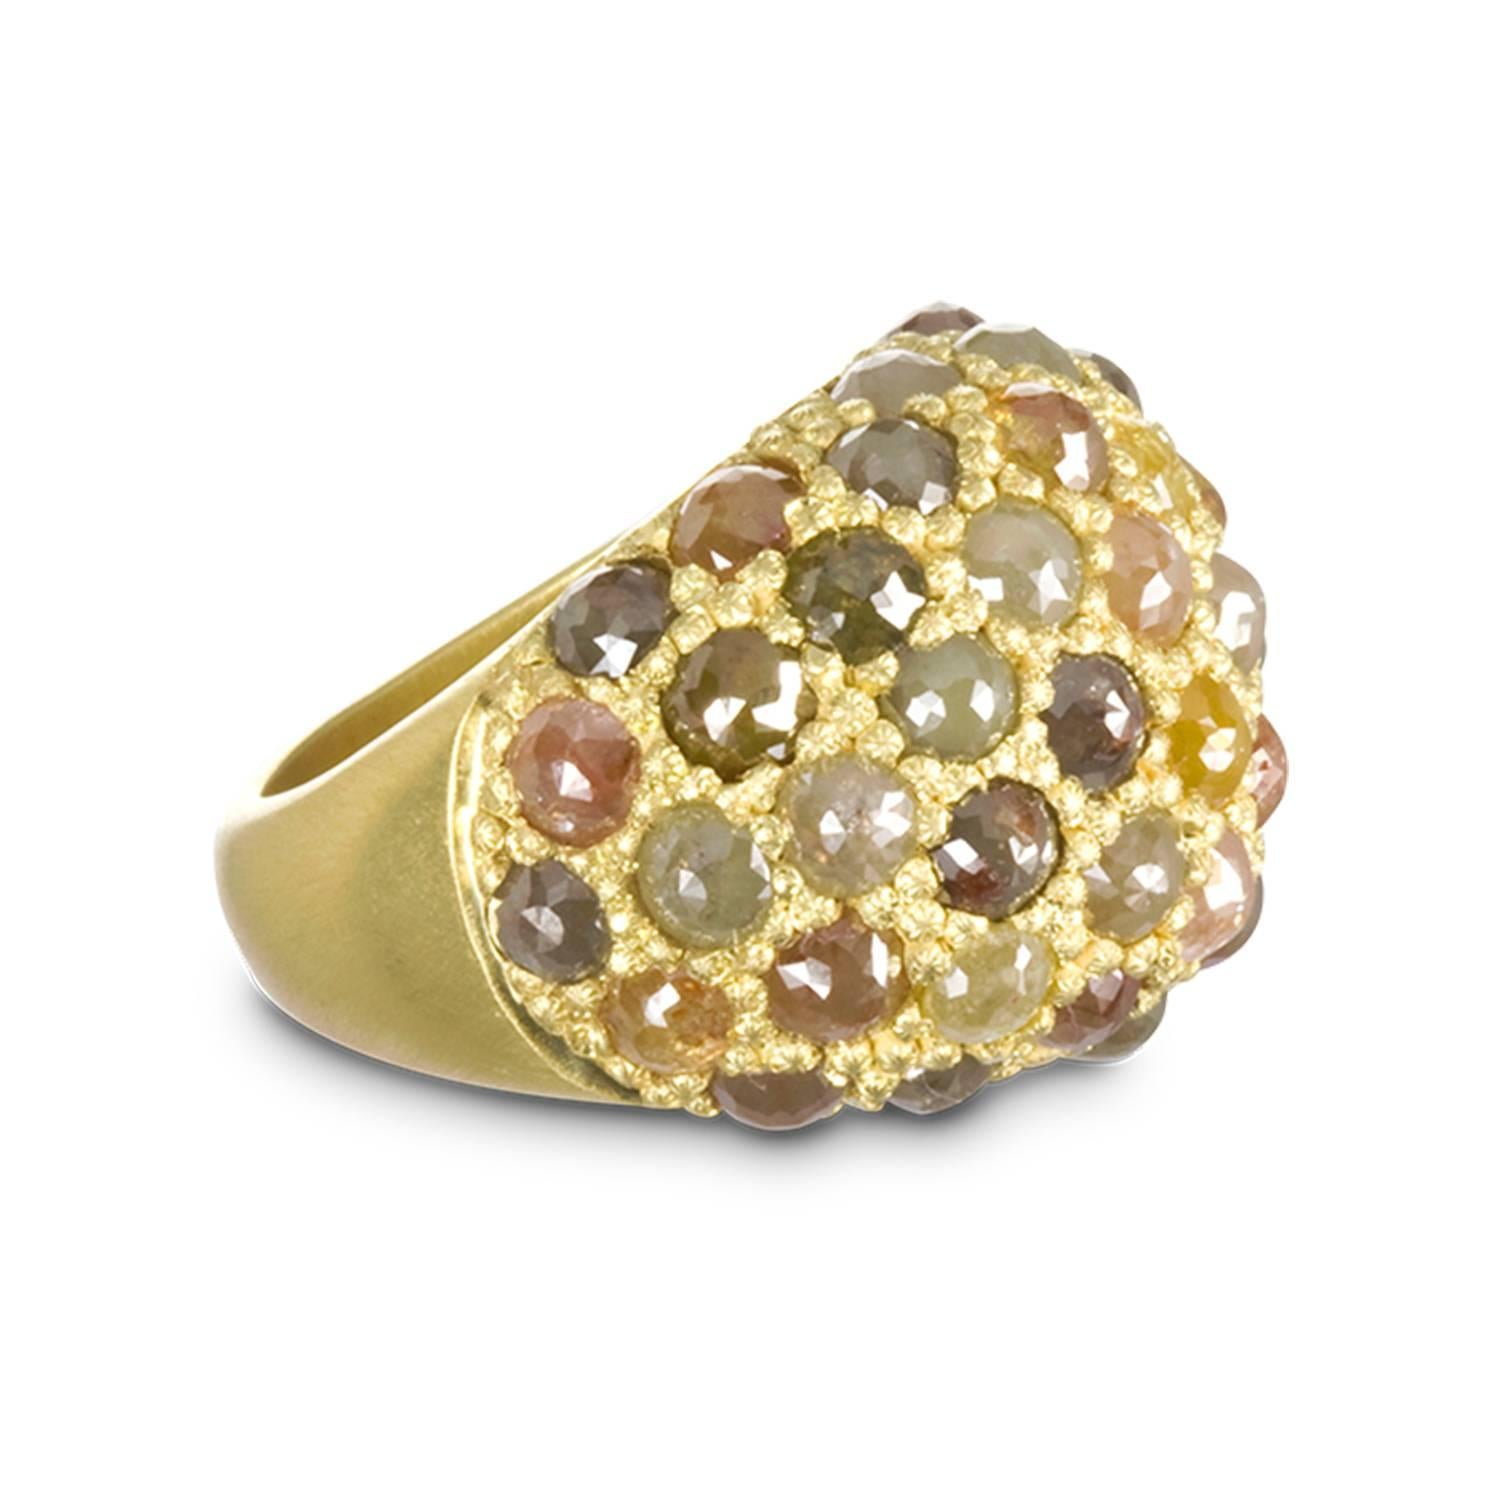 Rich in color, texture, and substance, this is the quintessential statement ring.  Meticulously handcrafted in 18k gold*, each rose cut milky diamond is pave-set to create a dome ring that defines subtle sophistication and style for the modern